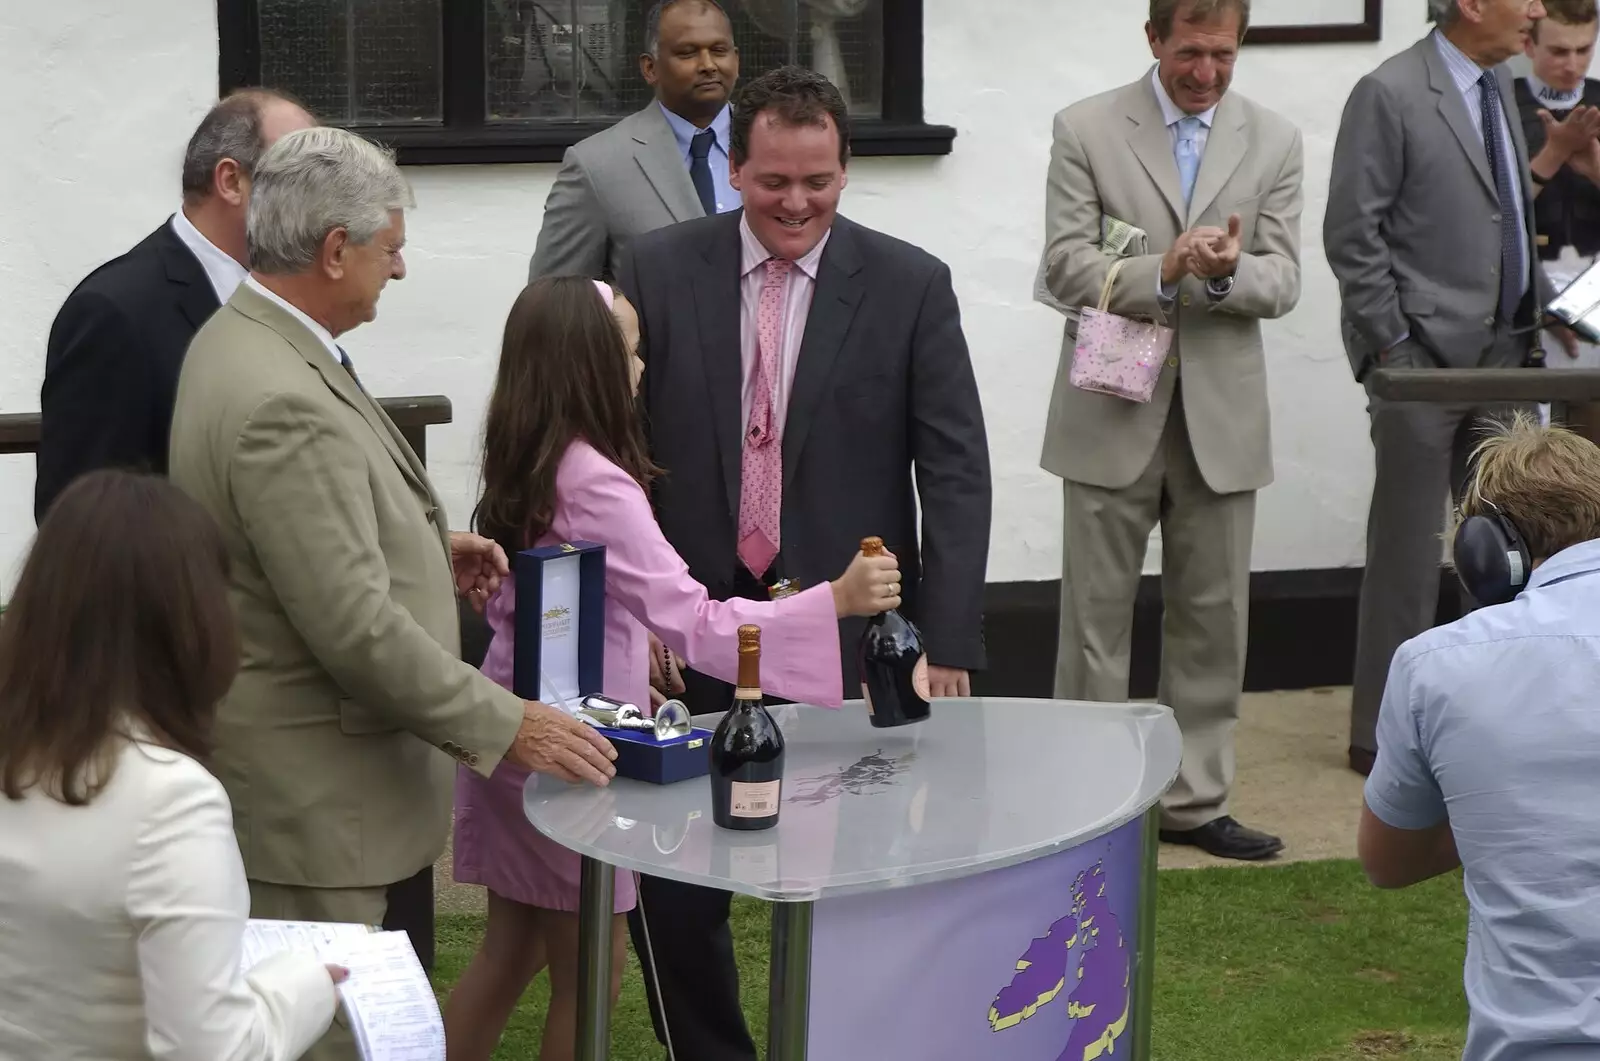 Champagne and prizes are handed out, from A Day At The Races, Newmarket, Suffolk - 23rd August 2008